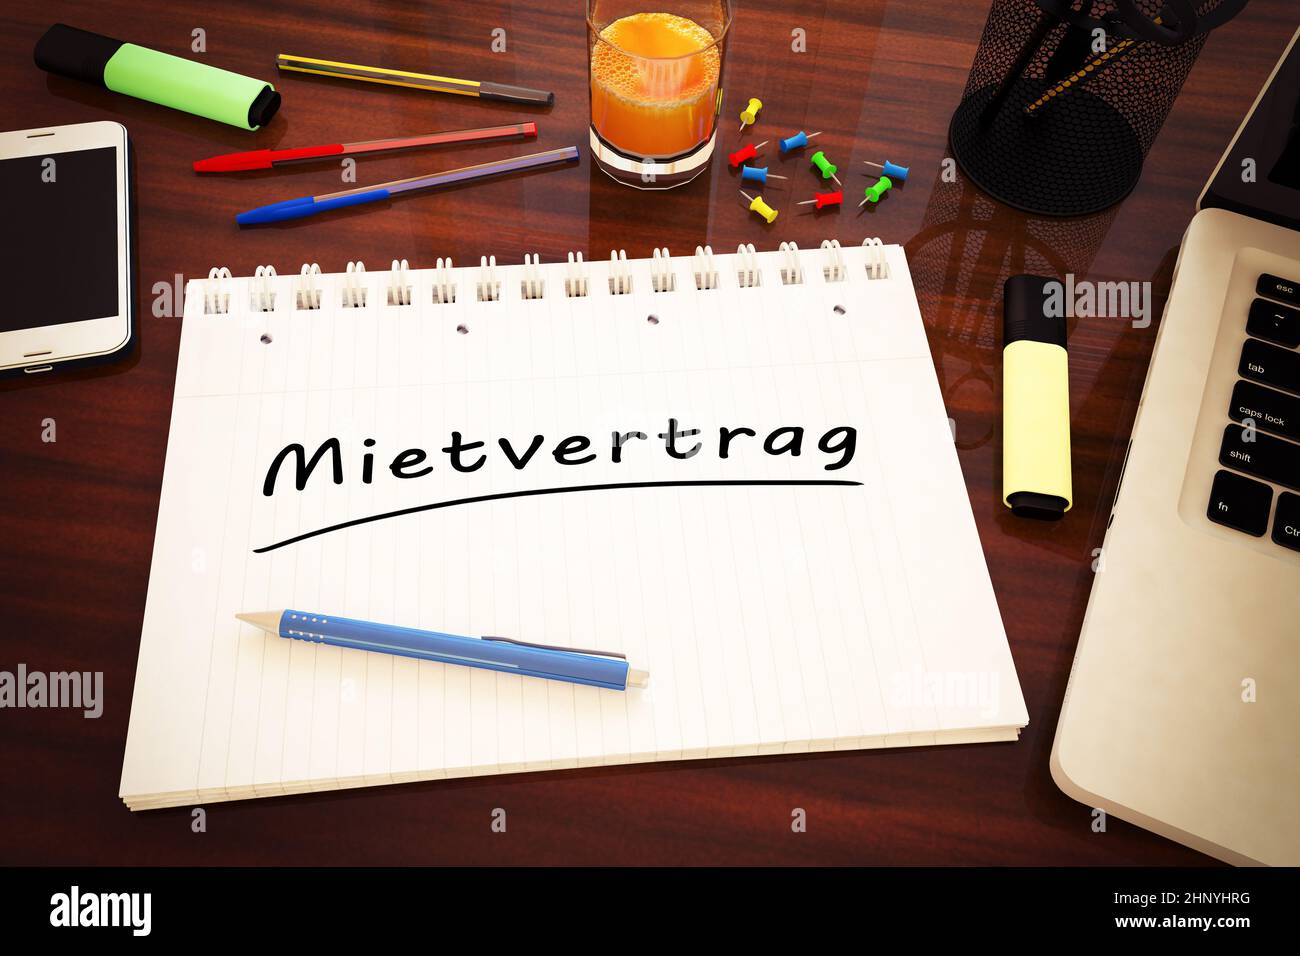 Mietvertrag - german word for rent contract or lease agreement - handwritten text in a notebook on a desk - 3d render illustration. Stock Photo